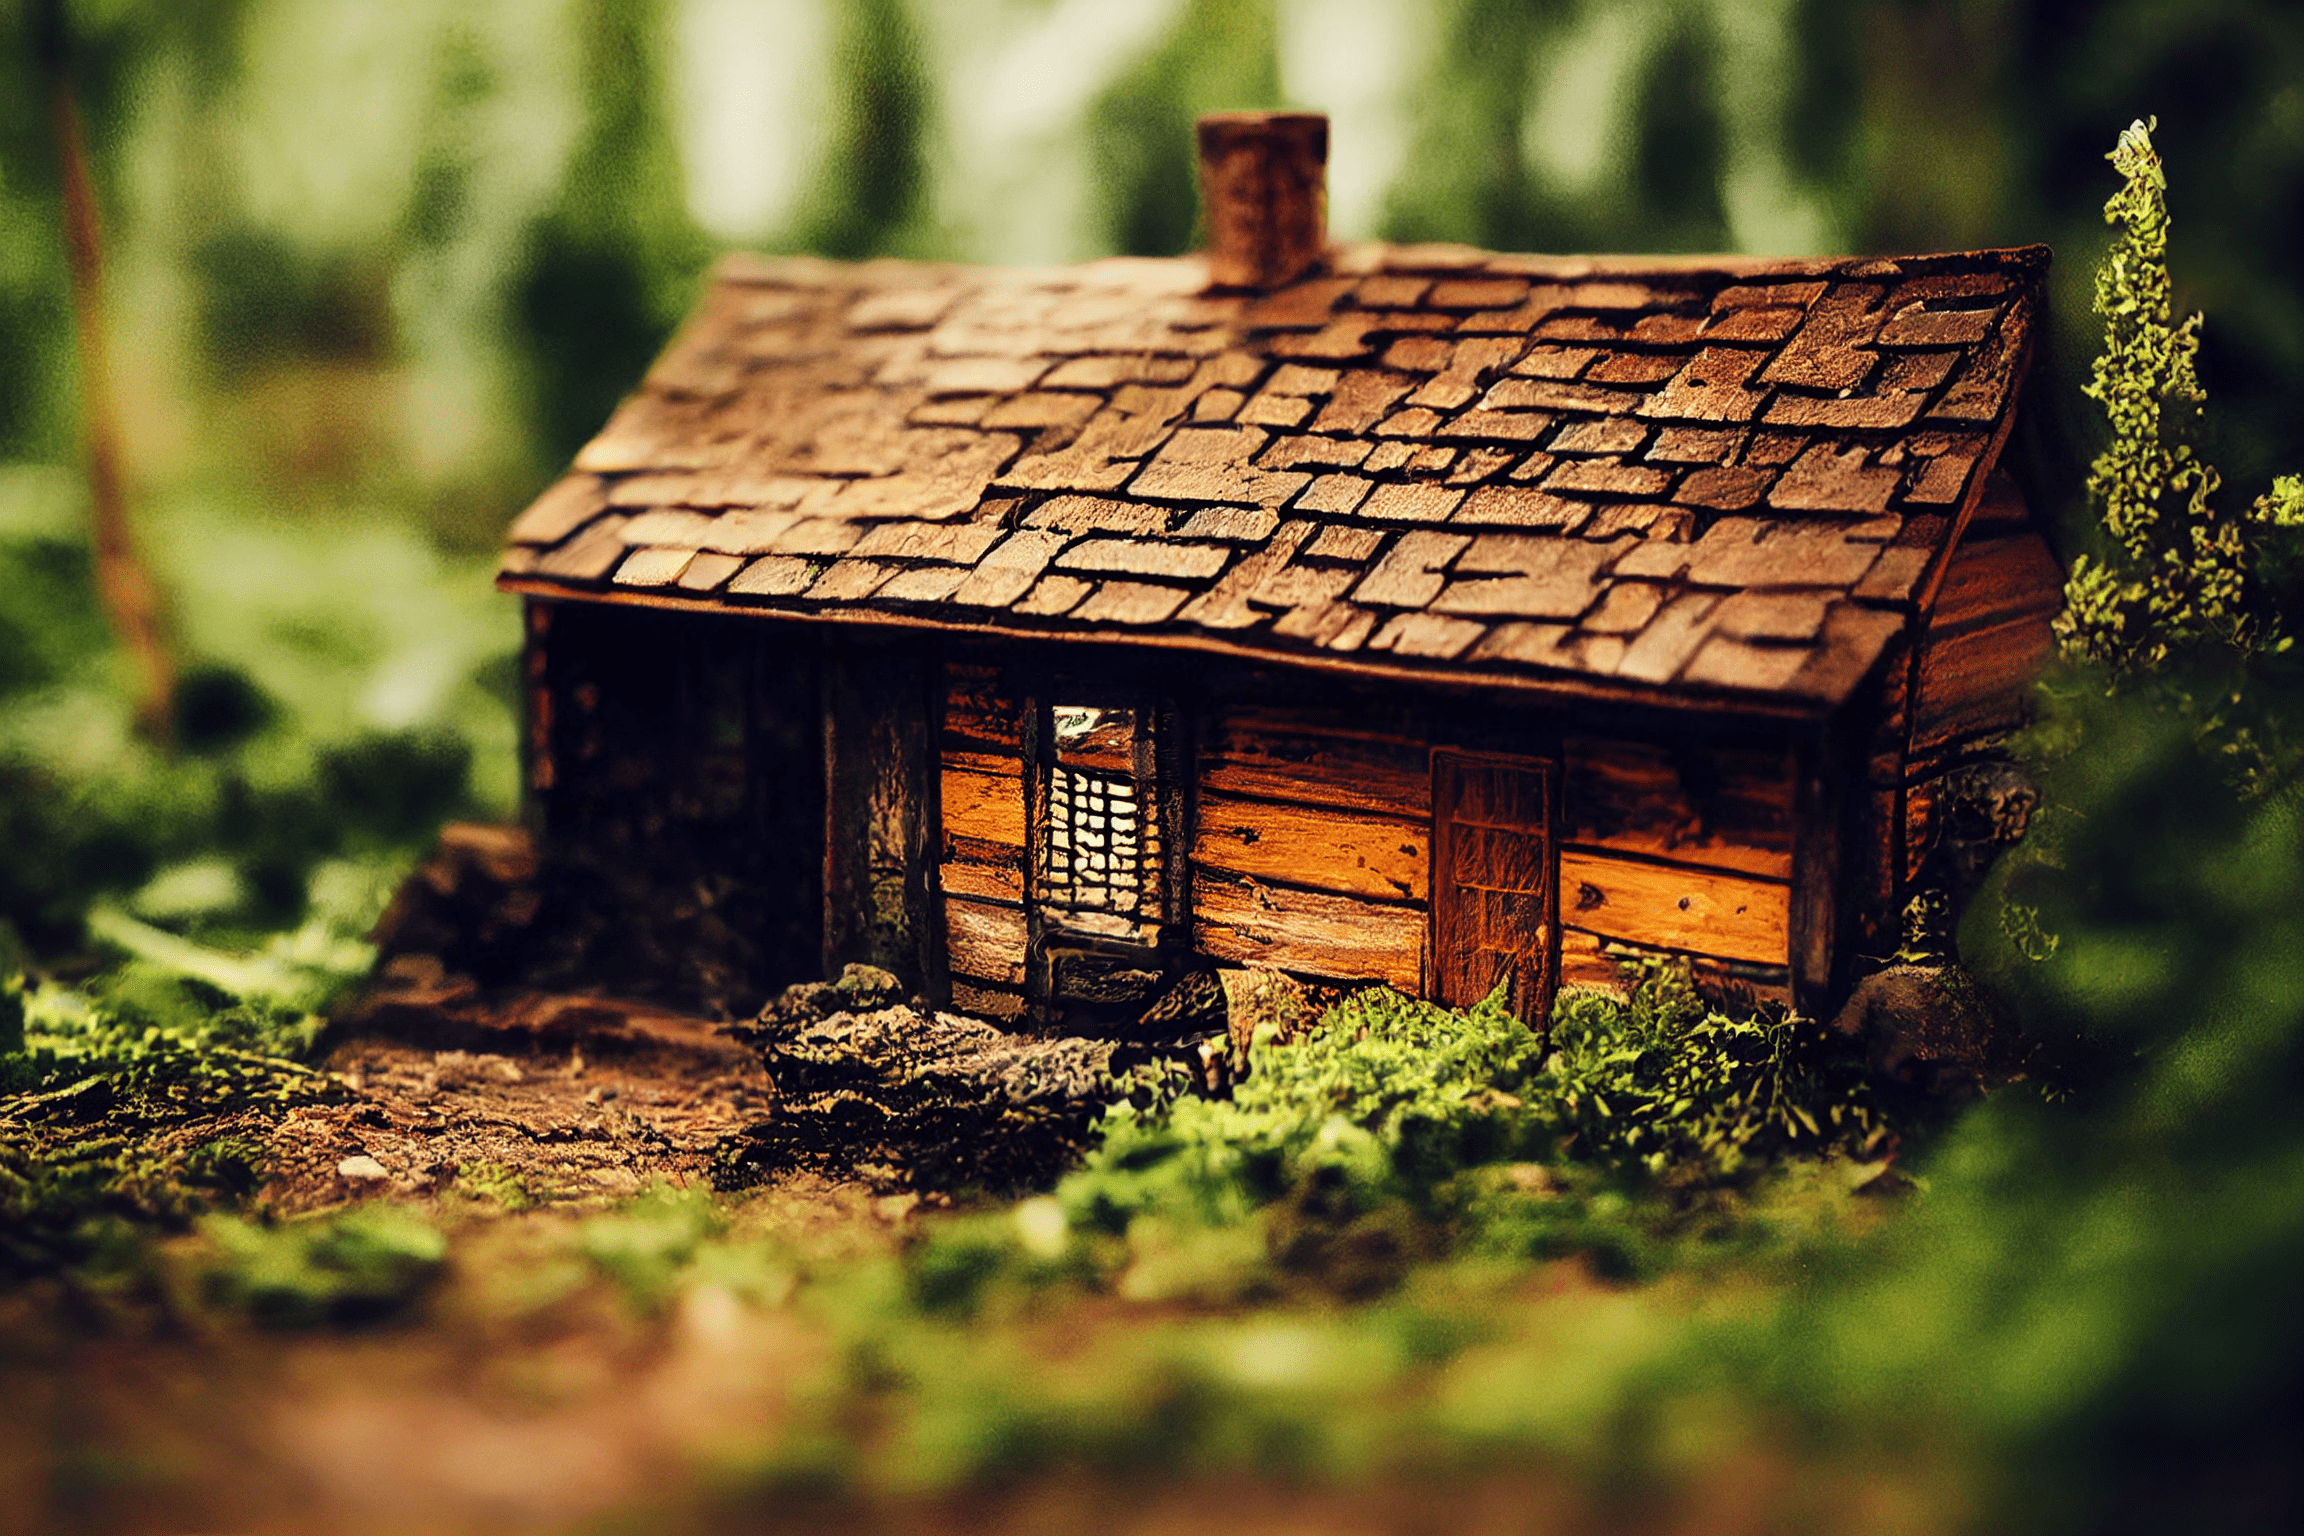 Way back a year ago – Cabincore miniature cabin with a miniature tree